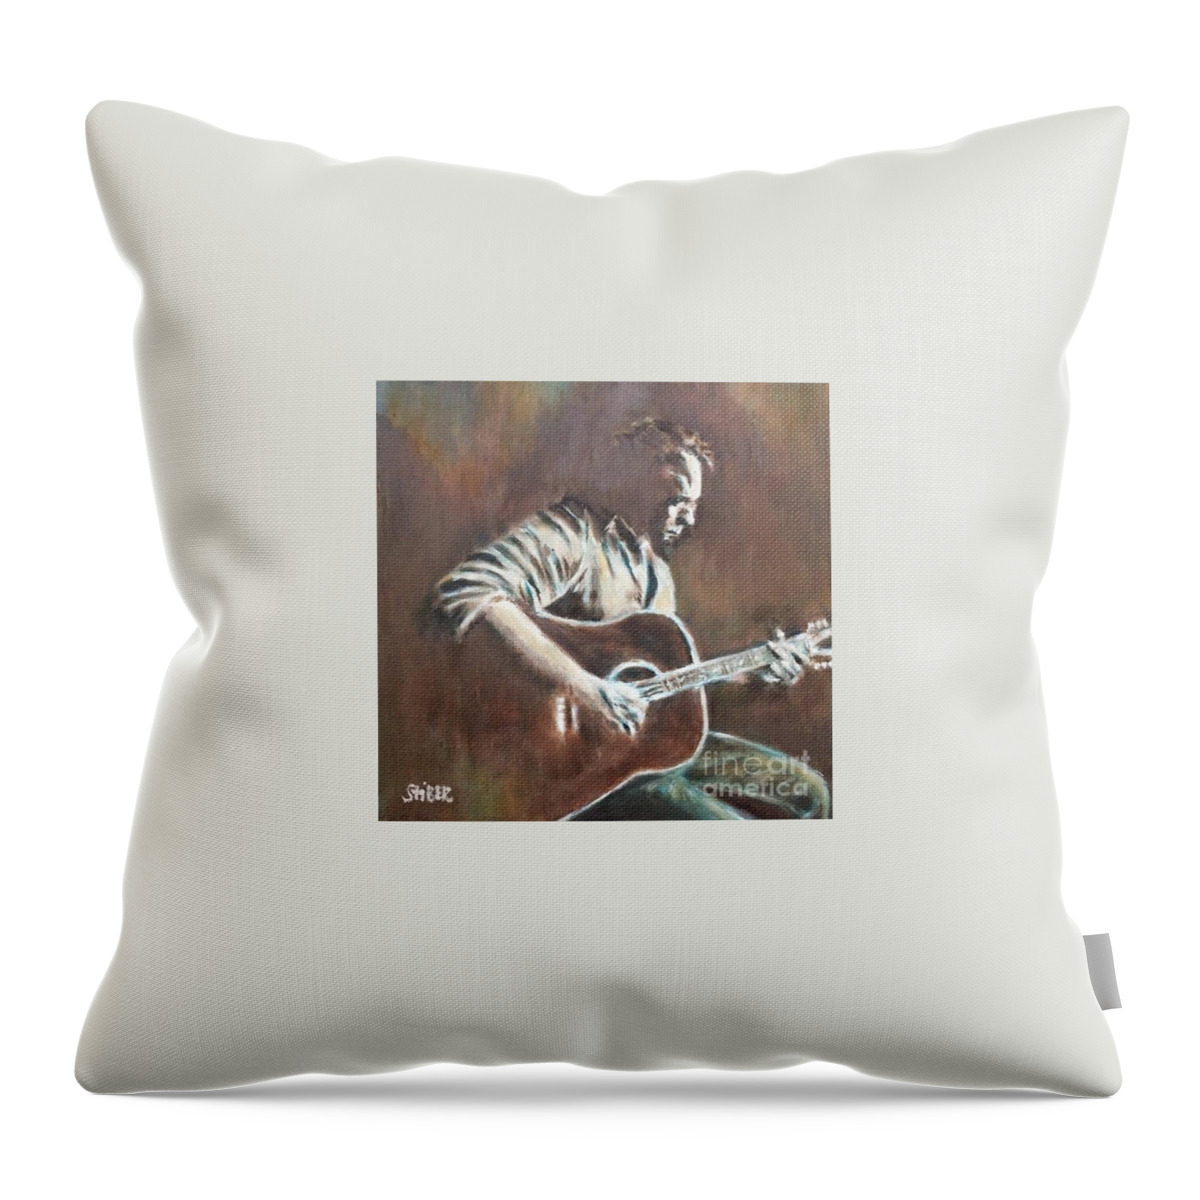 Amos Lee Throw Pillow featuring the painting Amos Lee by Kathy Stiber